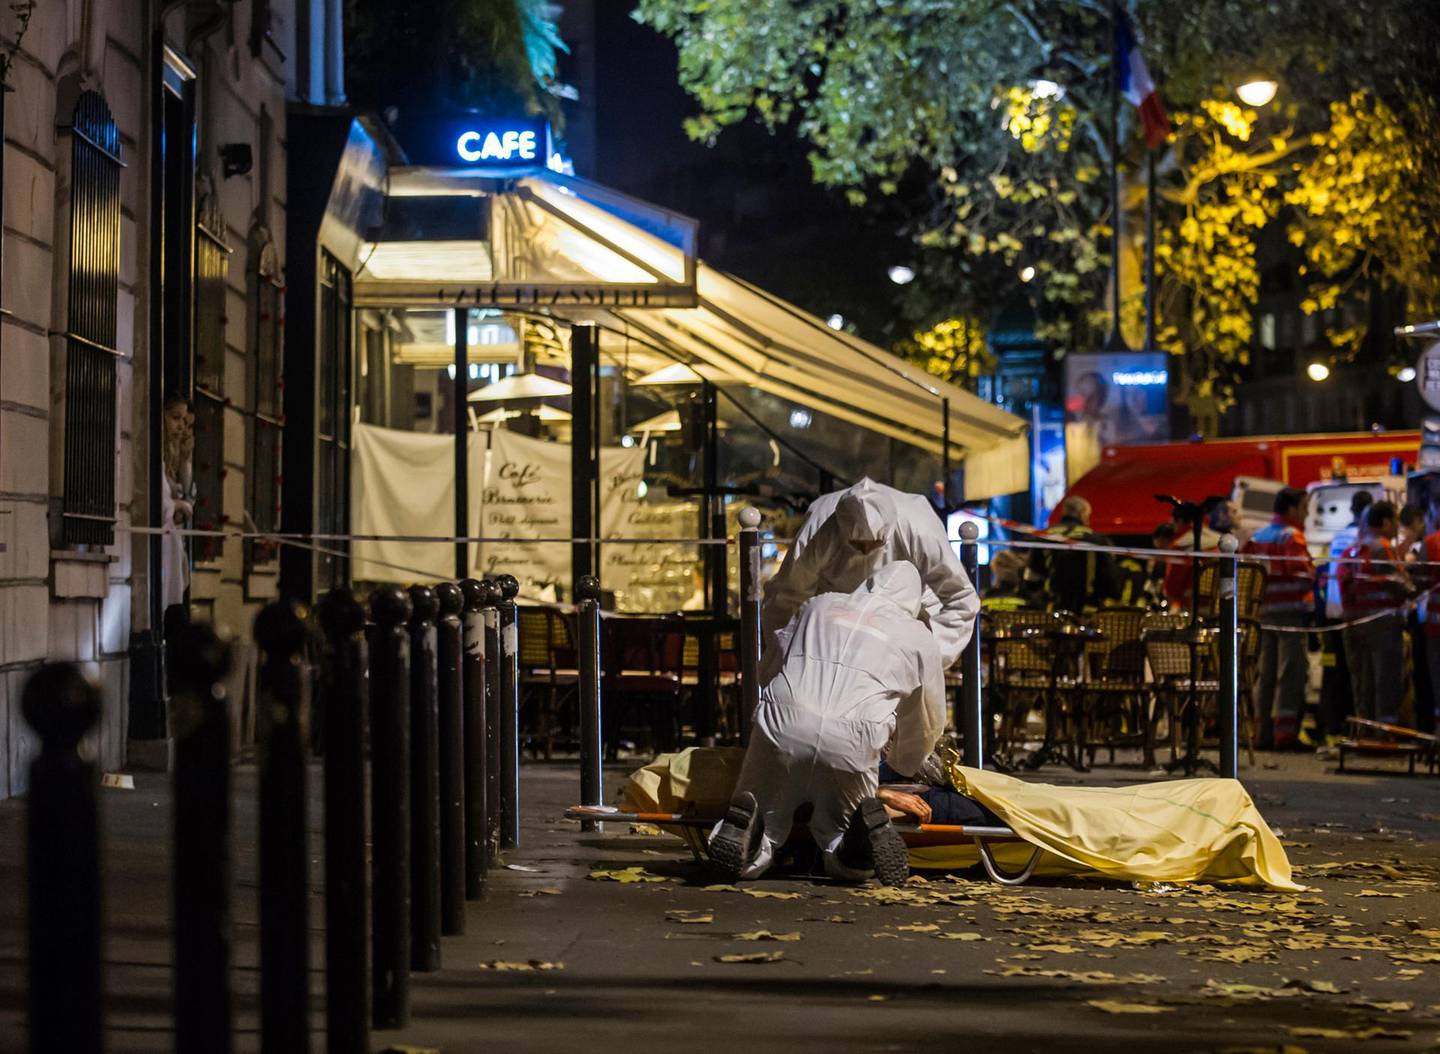 FILE - In this Friday, Nov. 13, 2015 file photo, investigating police officers inspect the lifeless body of a victim of a shooting attack outside the Bataclan concert hall in Paris. French judges investigating the 2015 Islamic State attacks that left 130 people dead in Paris have ordered charges against 20 people on Monday, including a Belgian accused of masterminding the attacks who was held for years in Abu Ghraib prison in Iraq before being freed and returned home. (AP Photo/Kamil Zihnioglu, File)